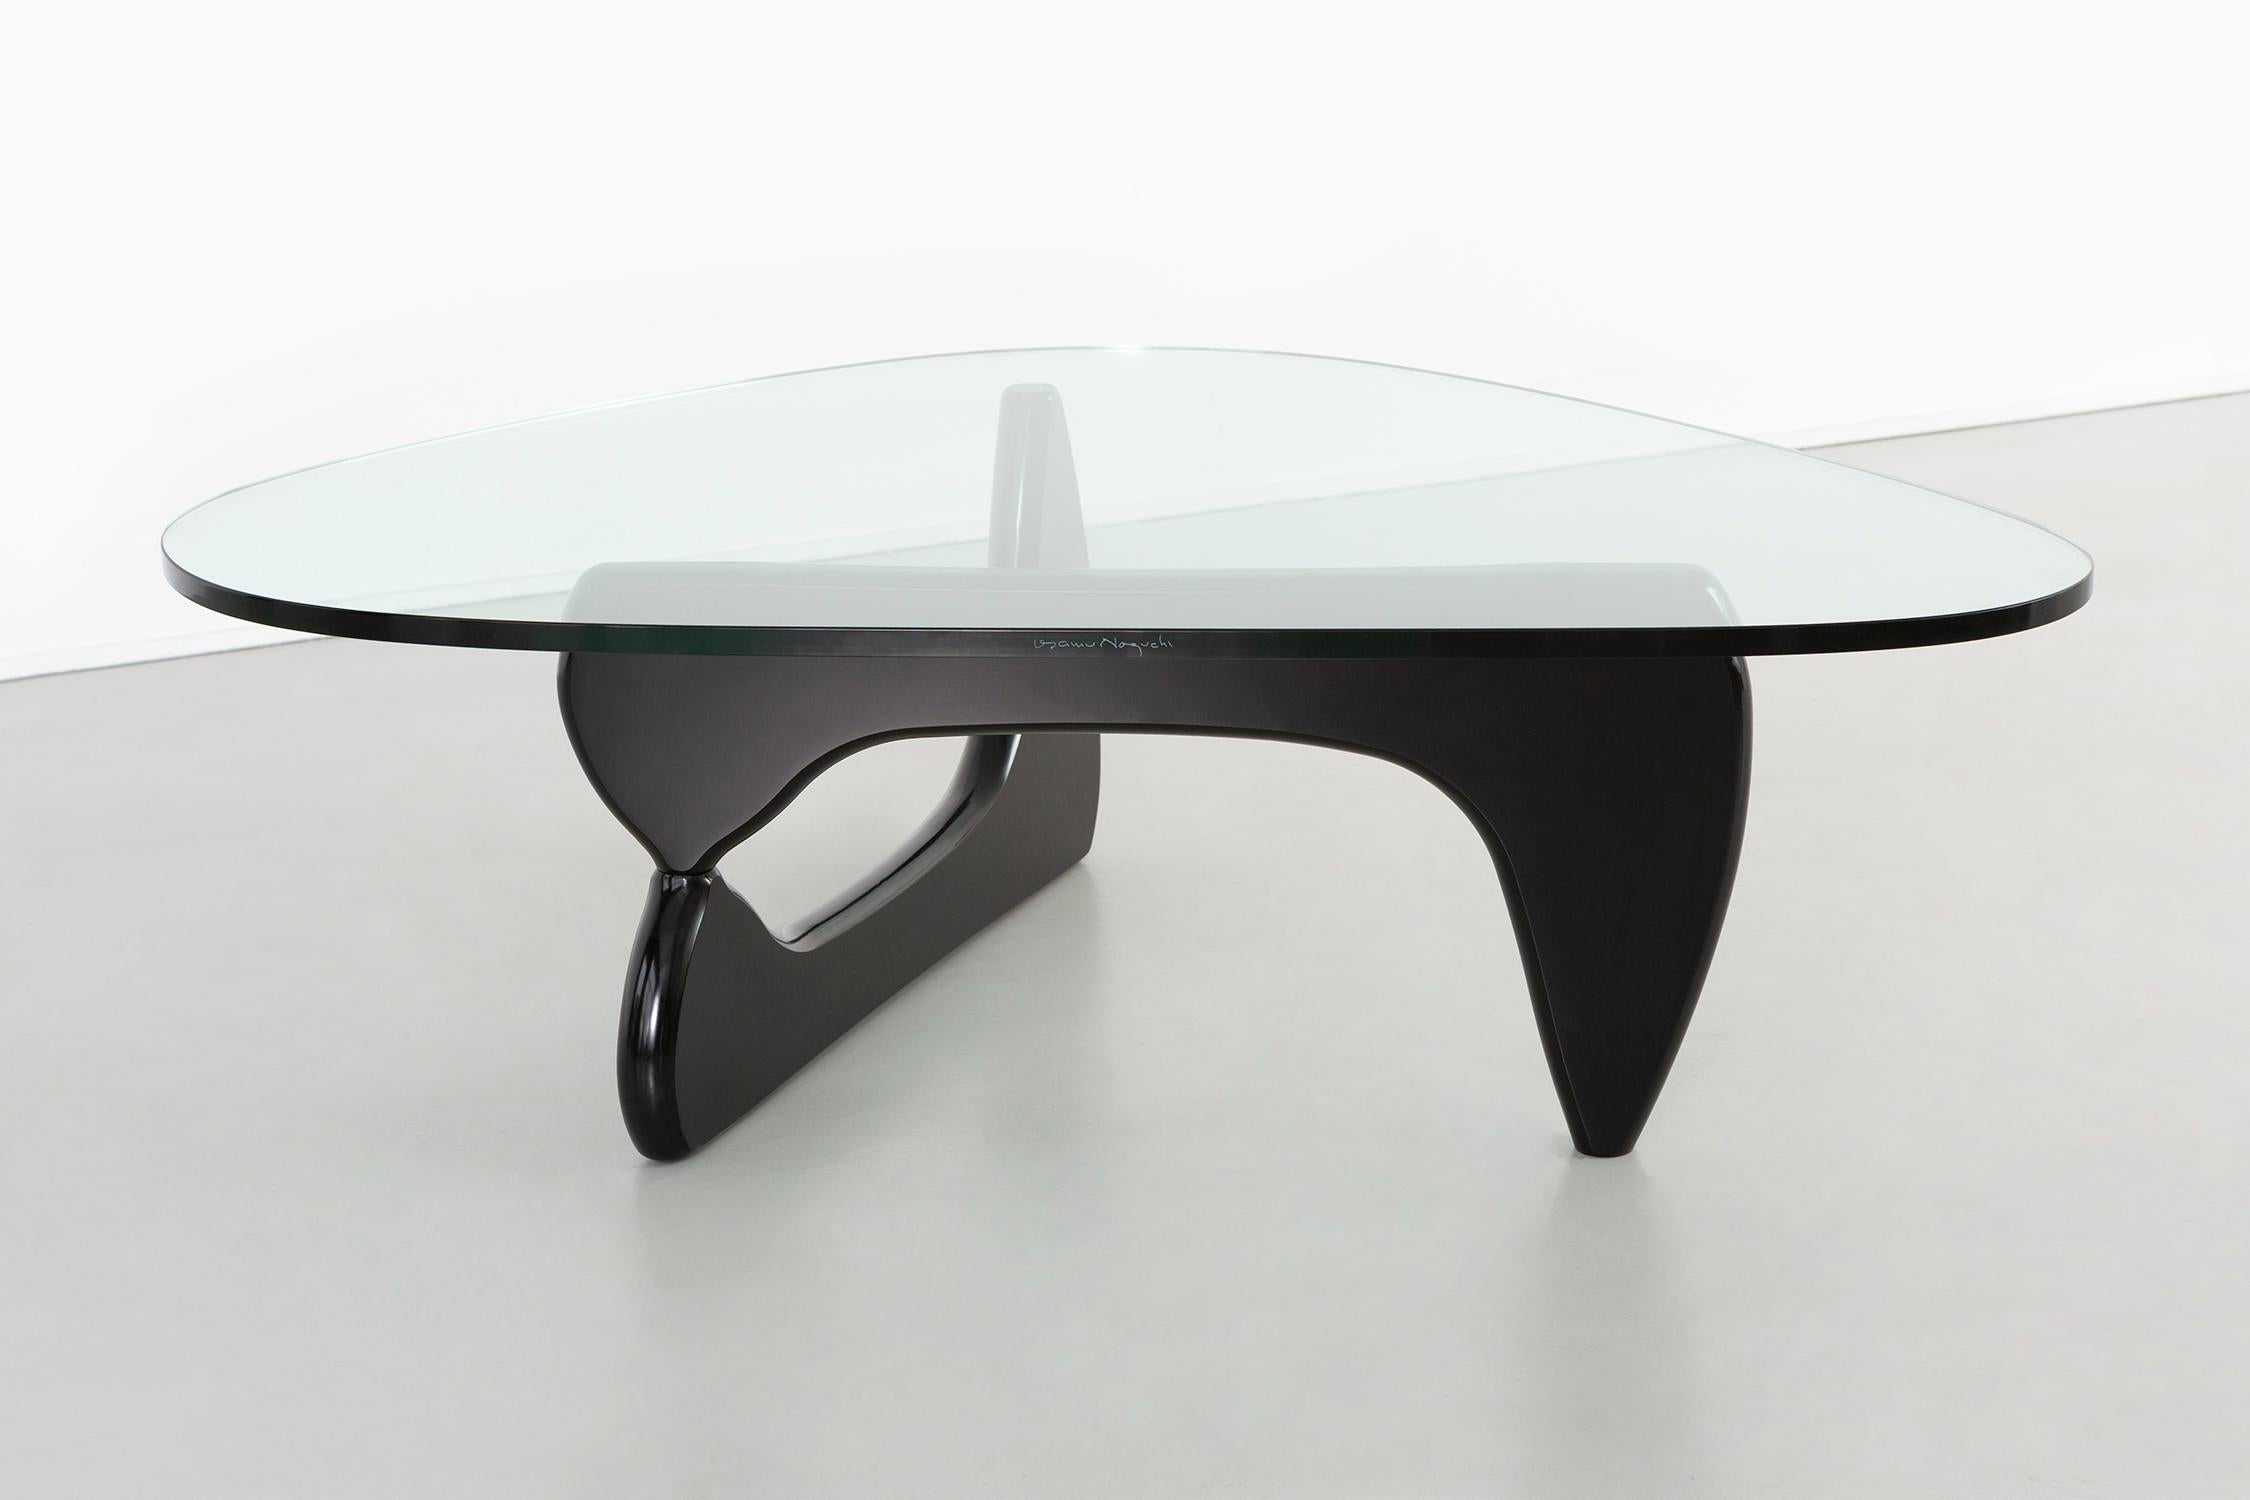 Coffee table

Designed by Isamu Noguchi for Herman Miller

USA, circa 1990s

Wood and glass.

Measures: 15 ¾” H x 40 ¾” W x 50 ?” D 

This authentic table has Noguchi’s signature etched into the side of the glass with the manufacturer’s